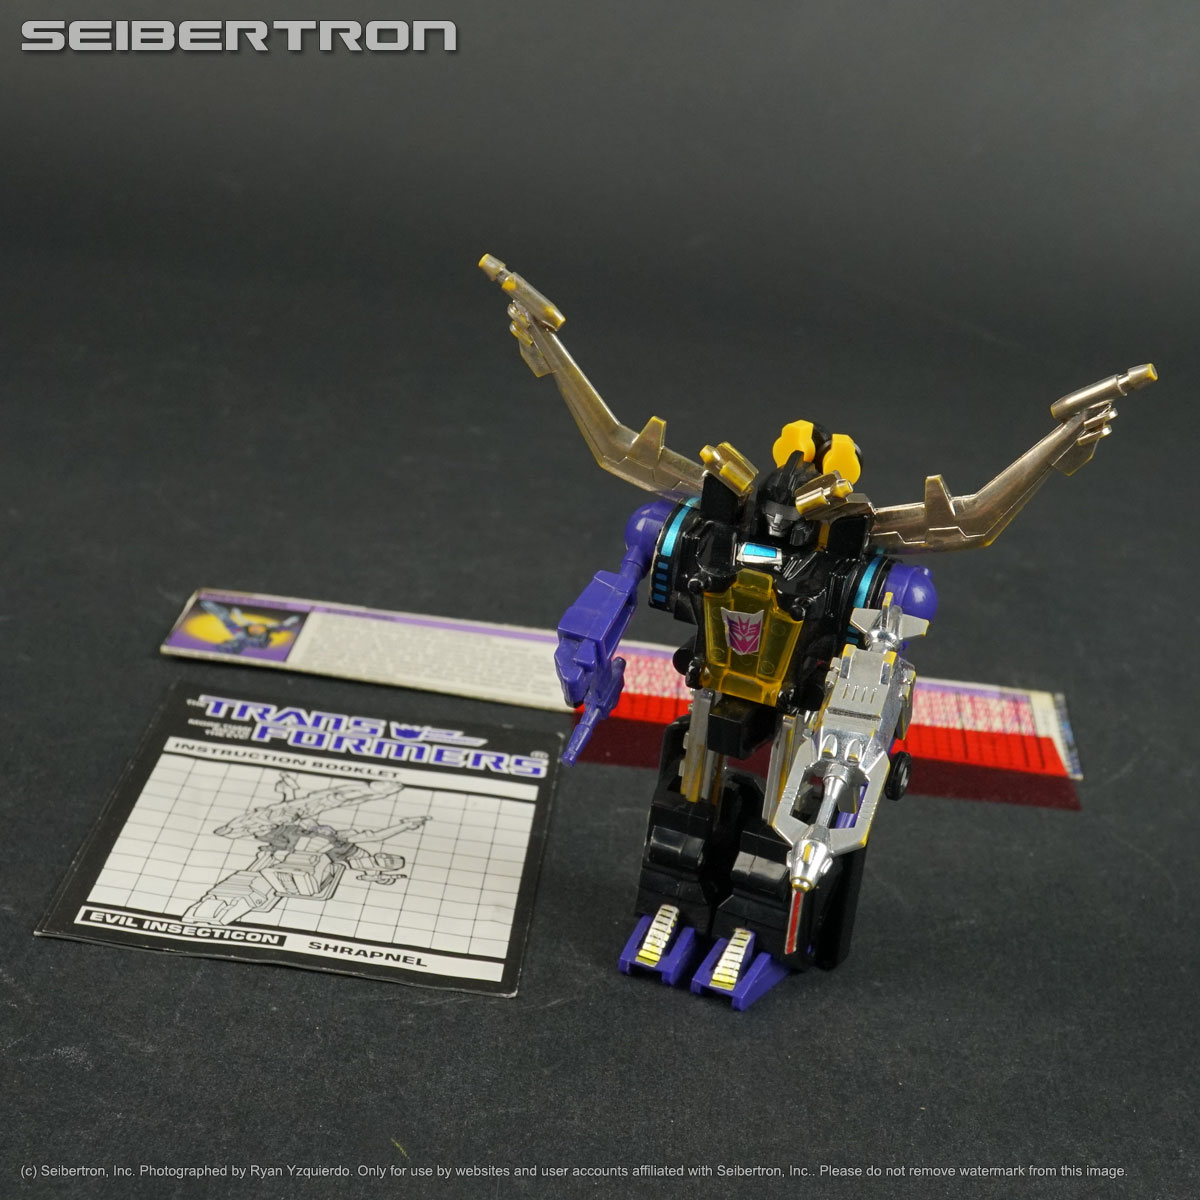 SHRAPNEL Transformers G1 Insecticons complete + instructions + more Hasbro 1985 221122A